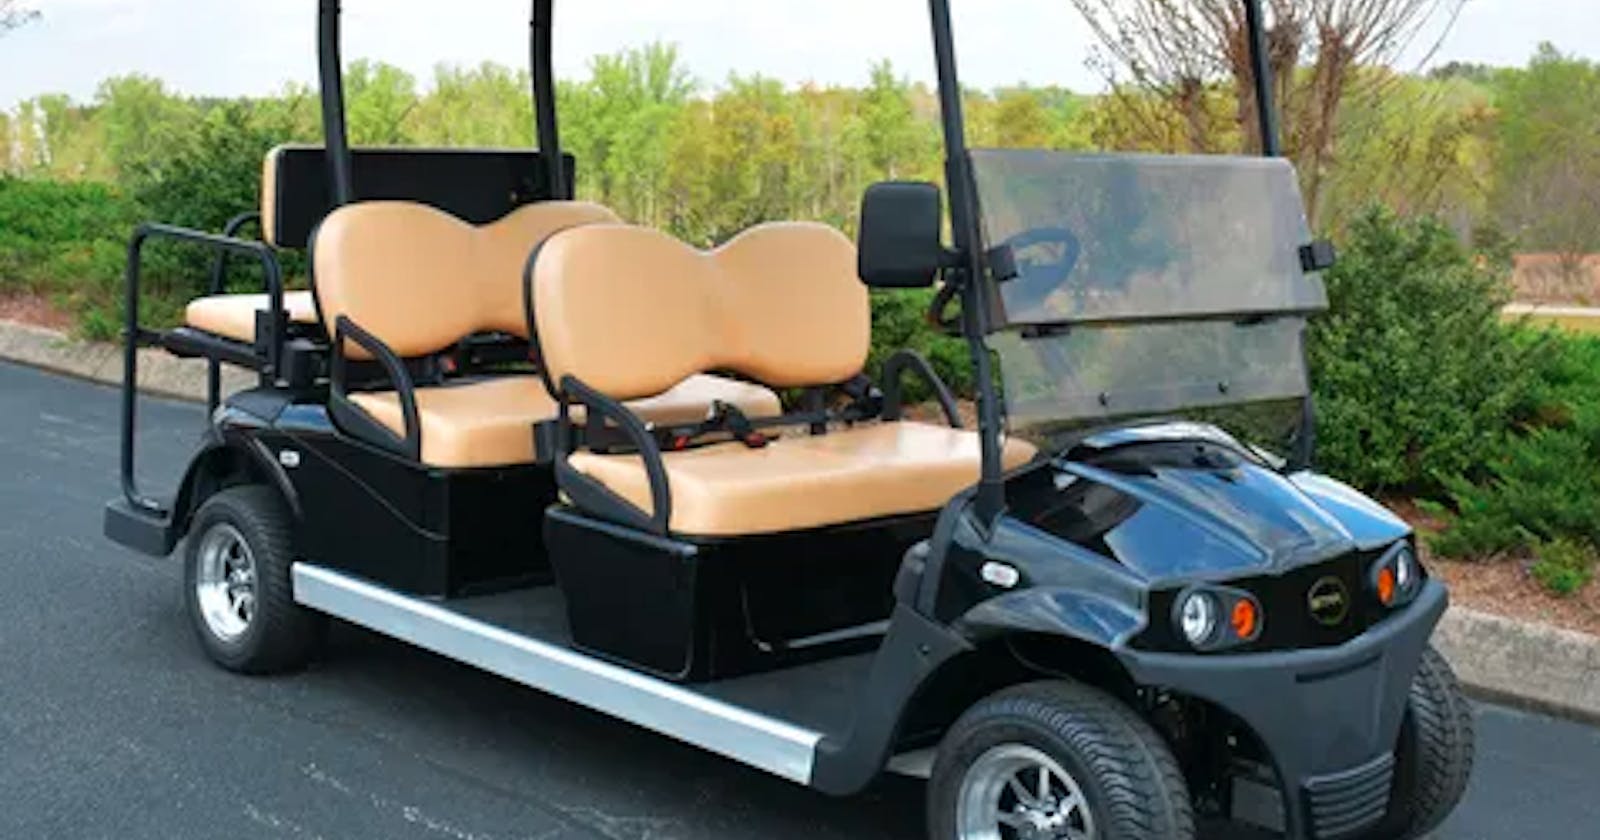 How to upgrade the Golf cart? Accessorizing a cart